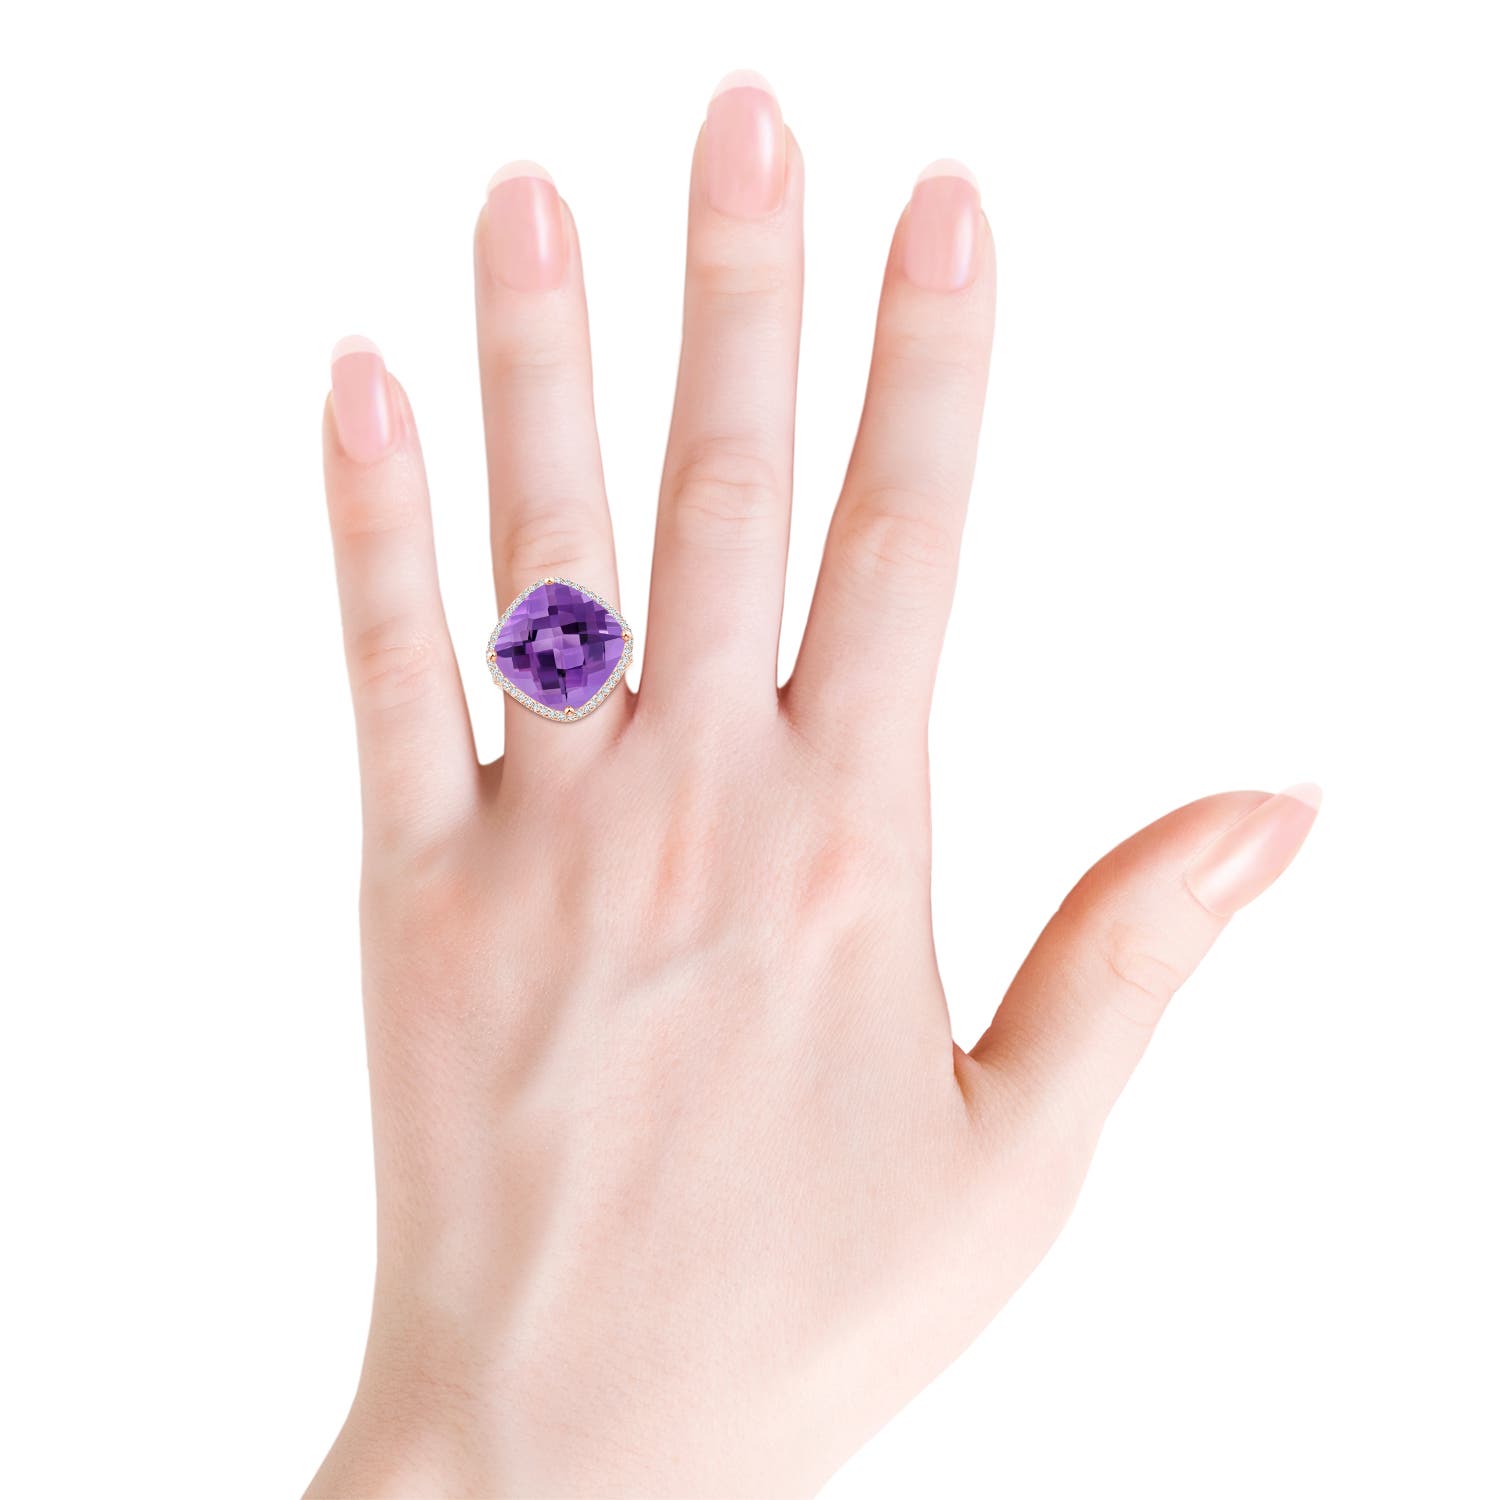 AA - Amethyst / 13.89 CT / 14 KT Rose Gold